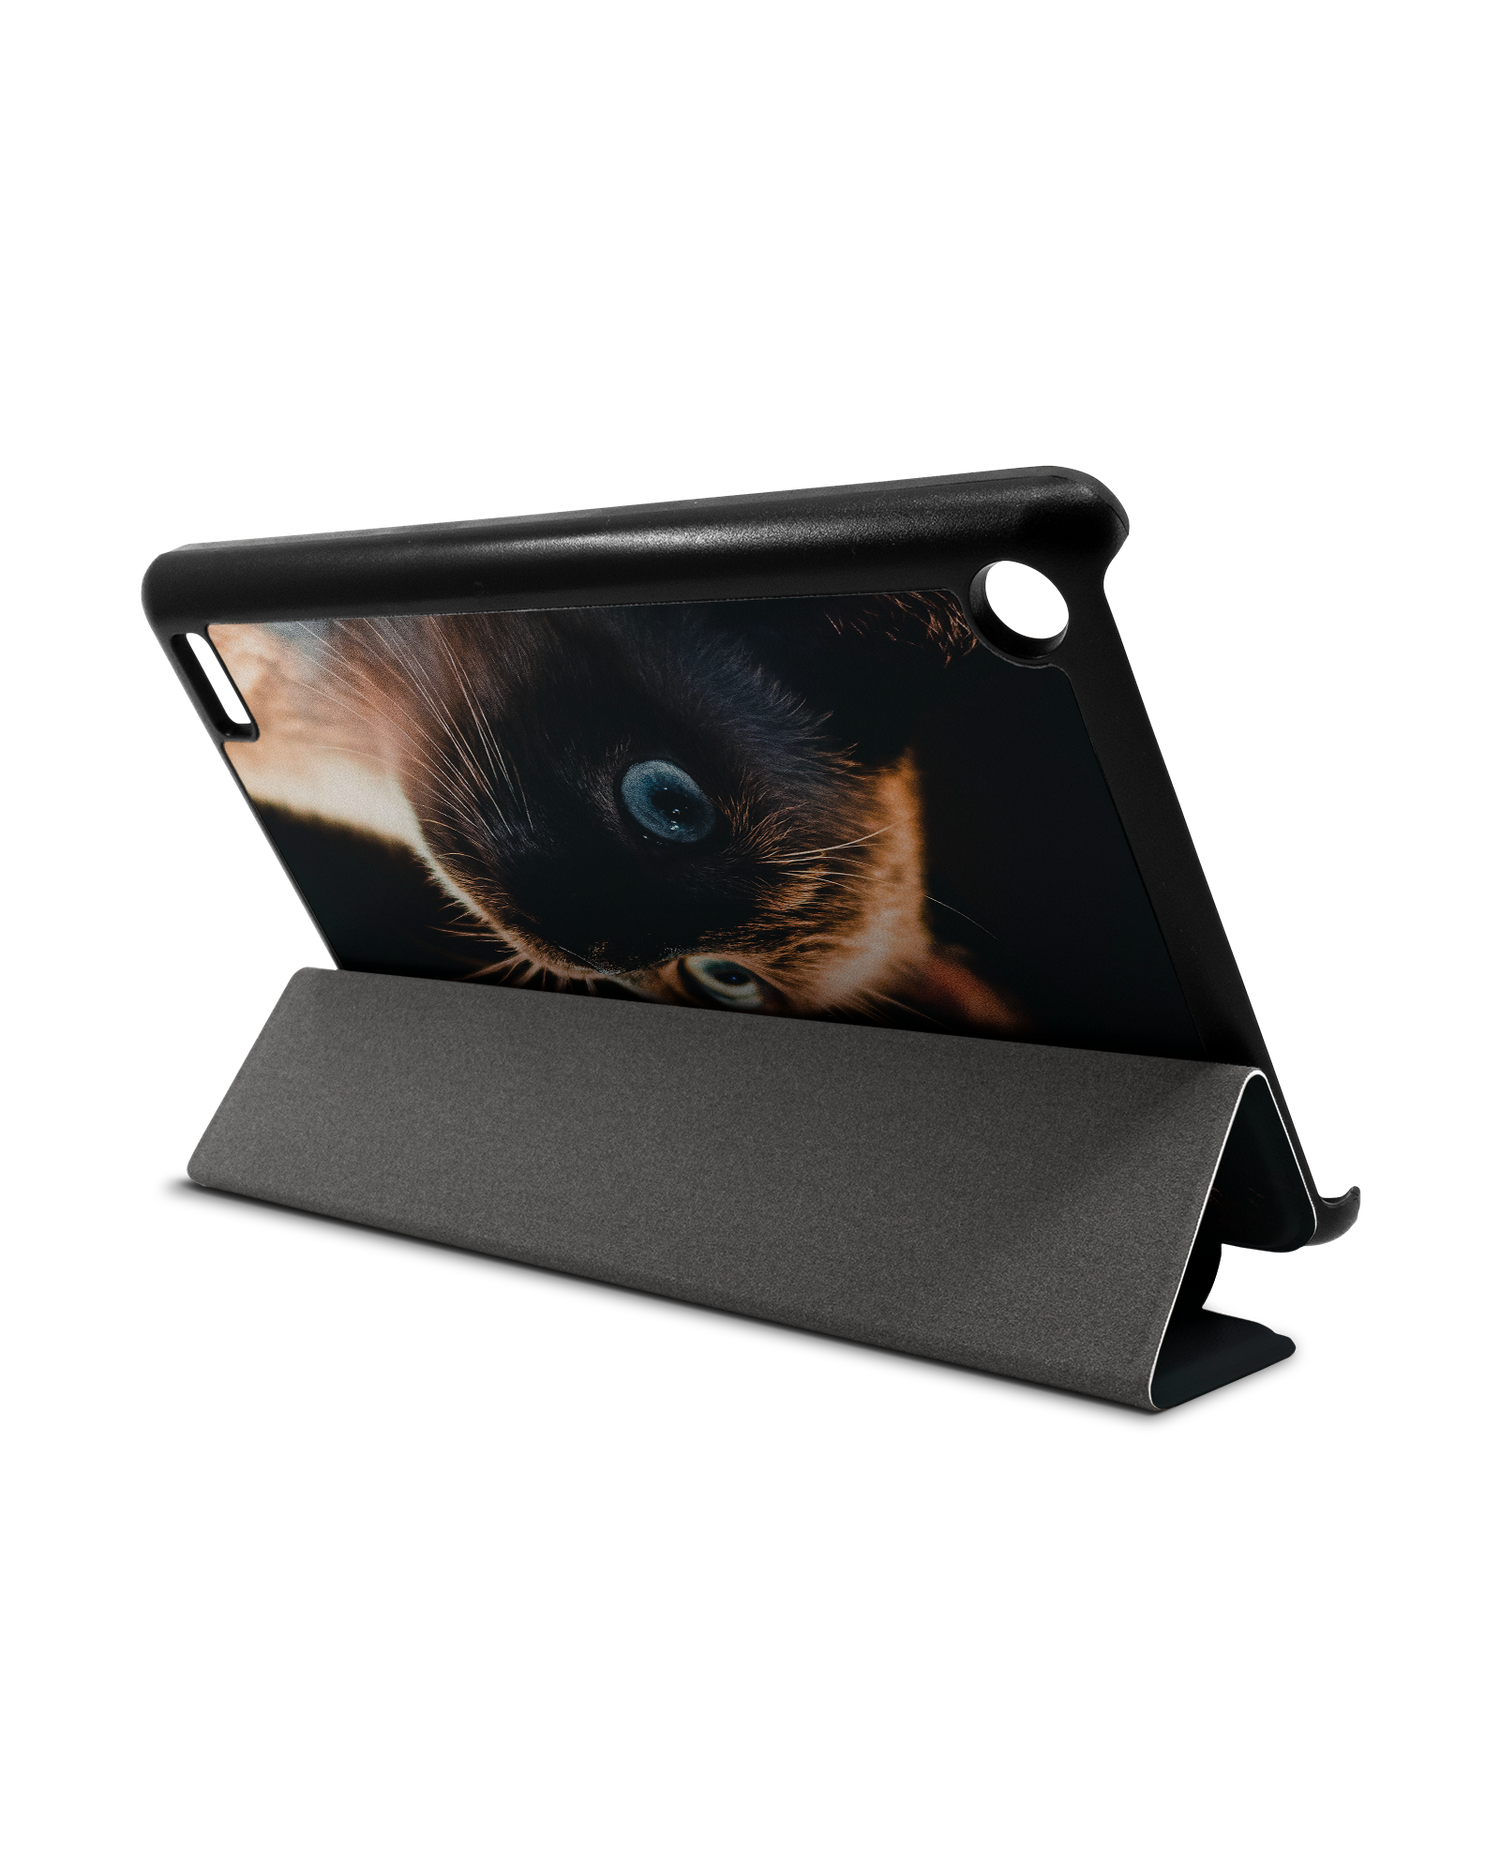 Siamese Cat Tablet Smart Case for Amazon Fire 7: Used as Stand